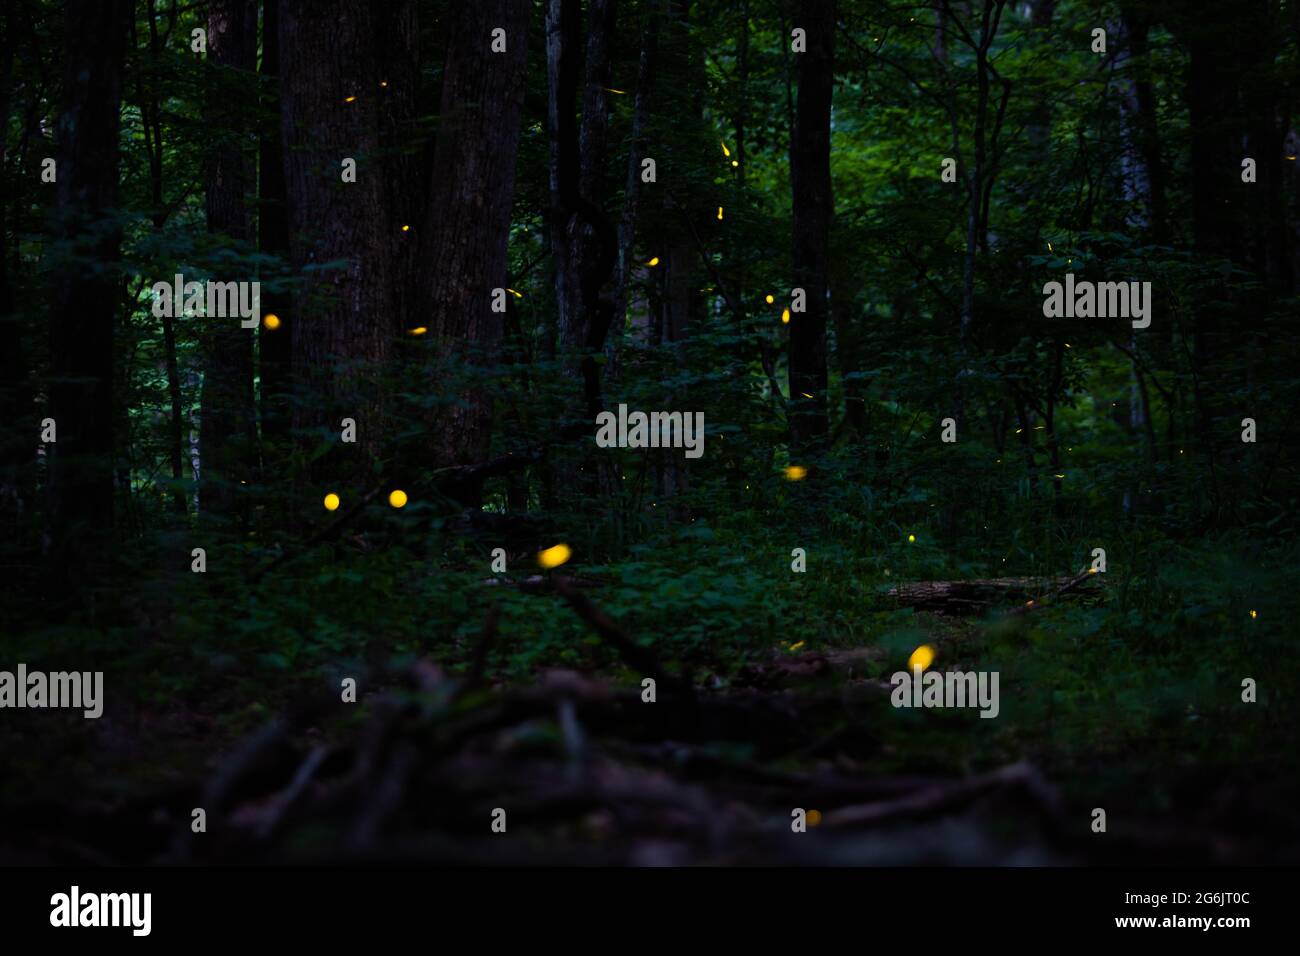 Real fireflies lights in the forest at night magic scenic view nobody Stock Photo